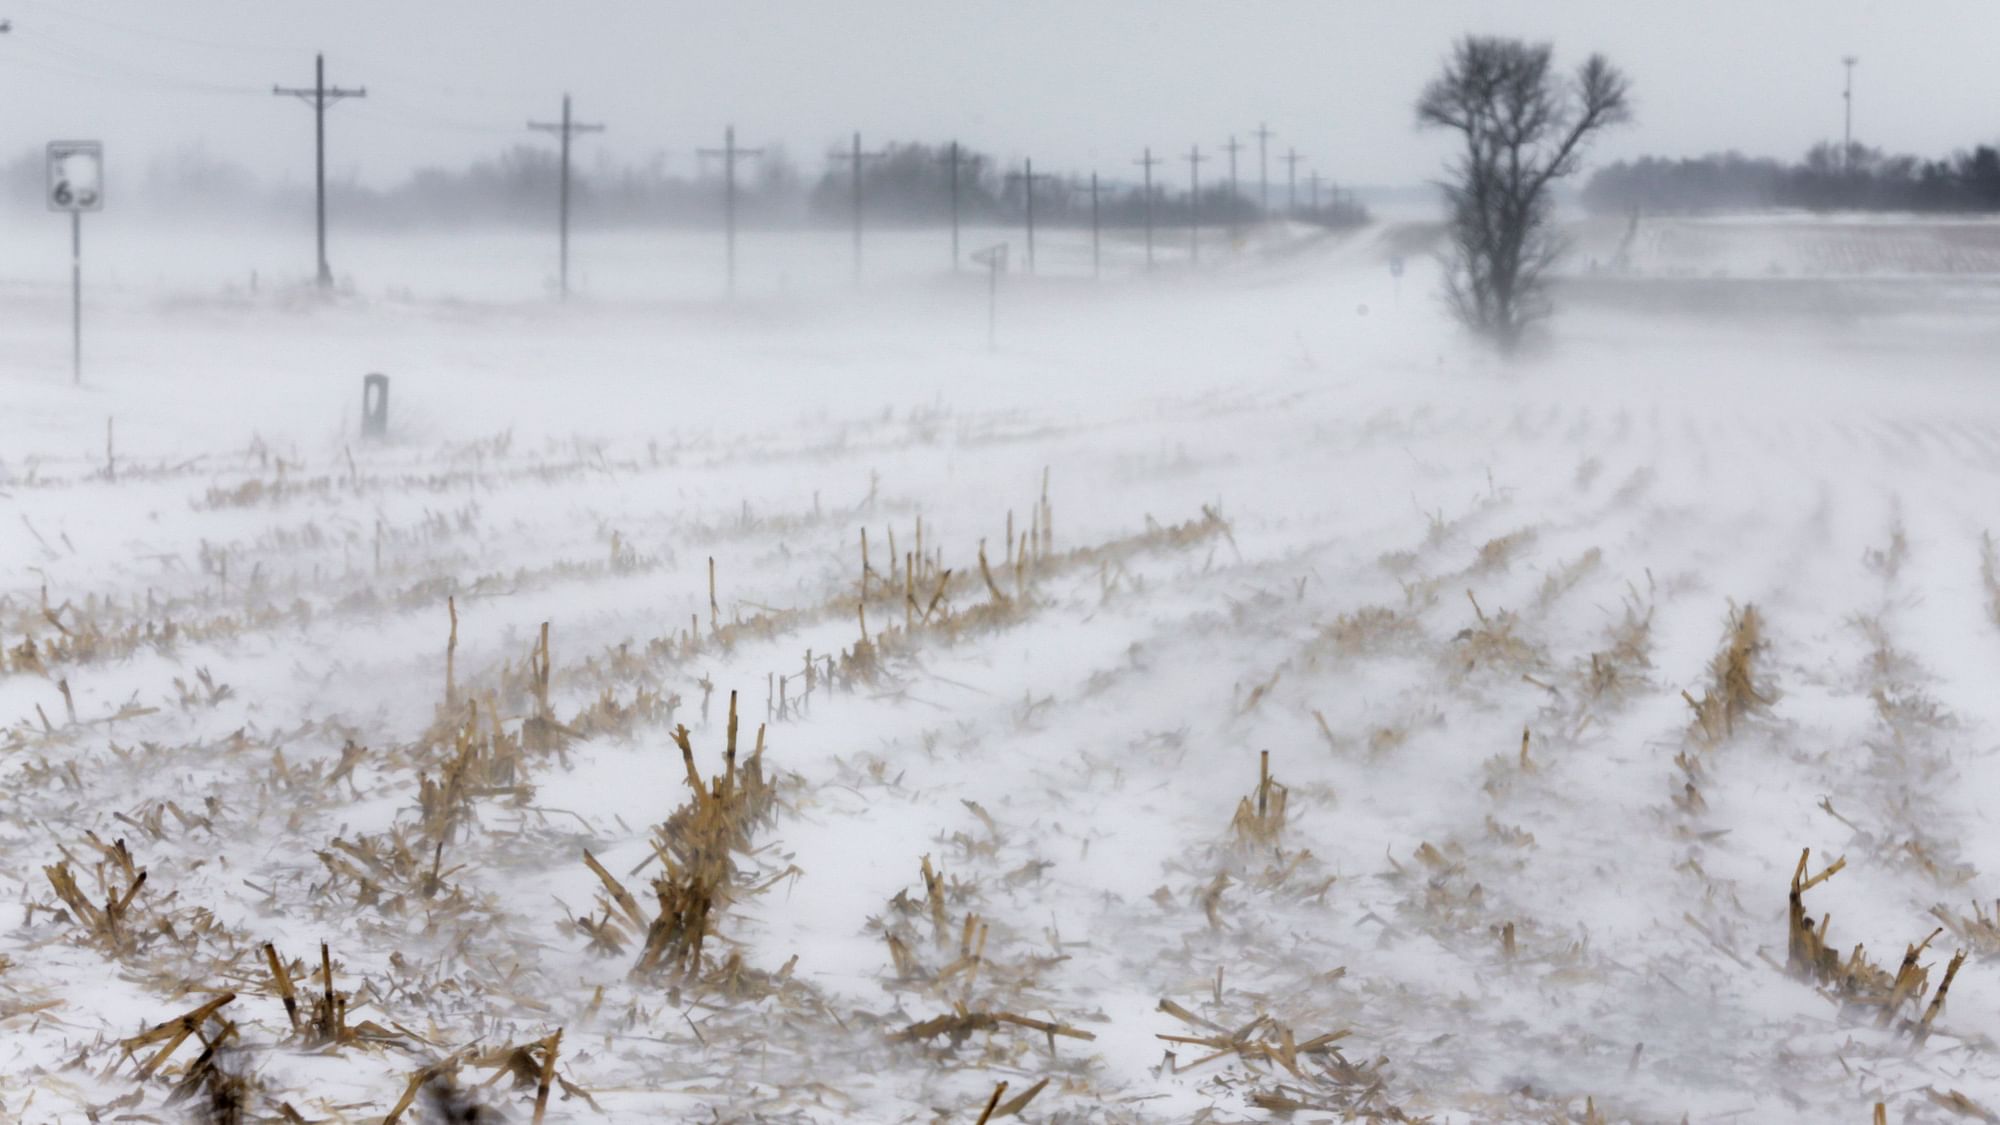 Rows of corn stalks stand in blowing snow north of Nebraska City, on Sunday, 25 November 2018.